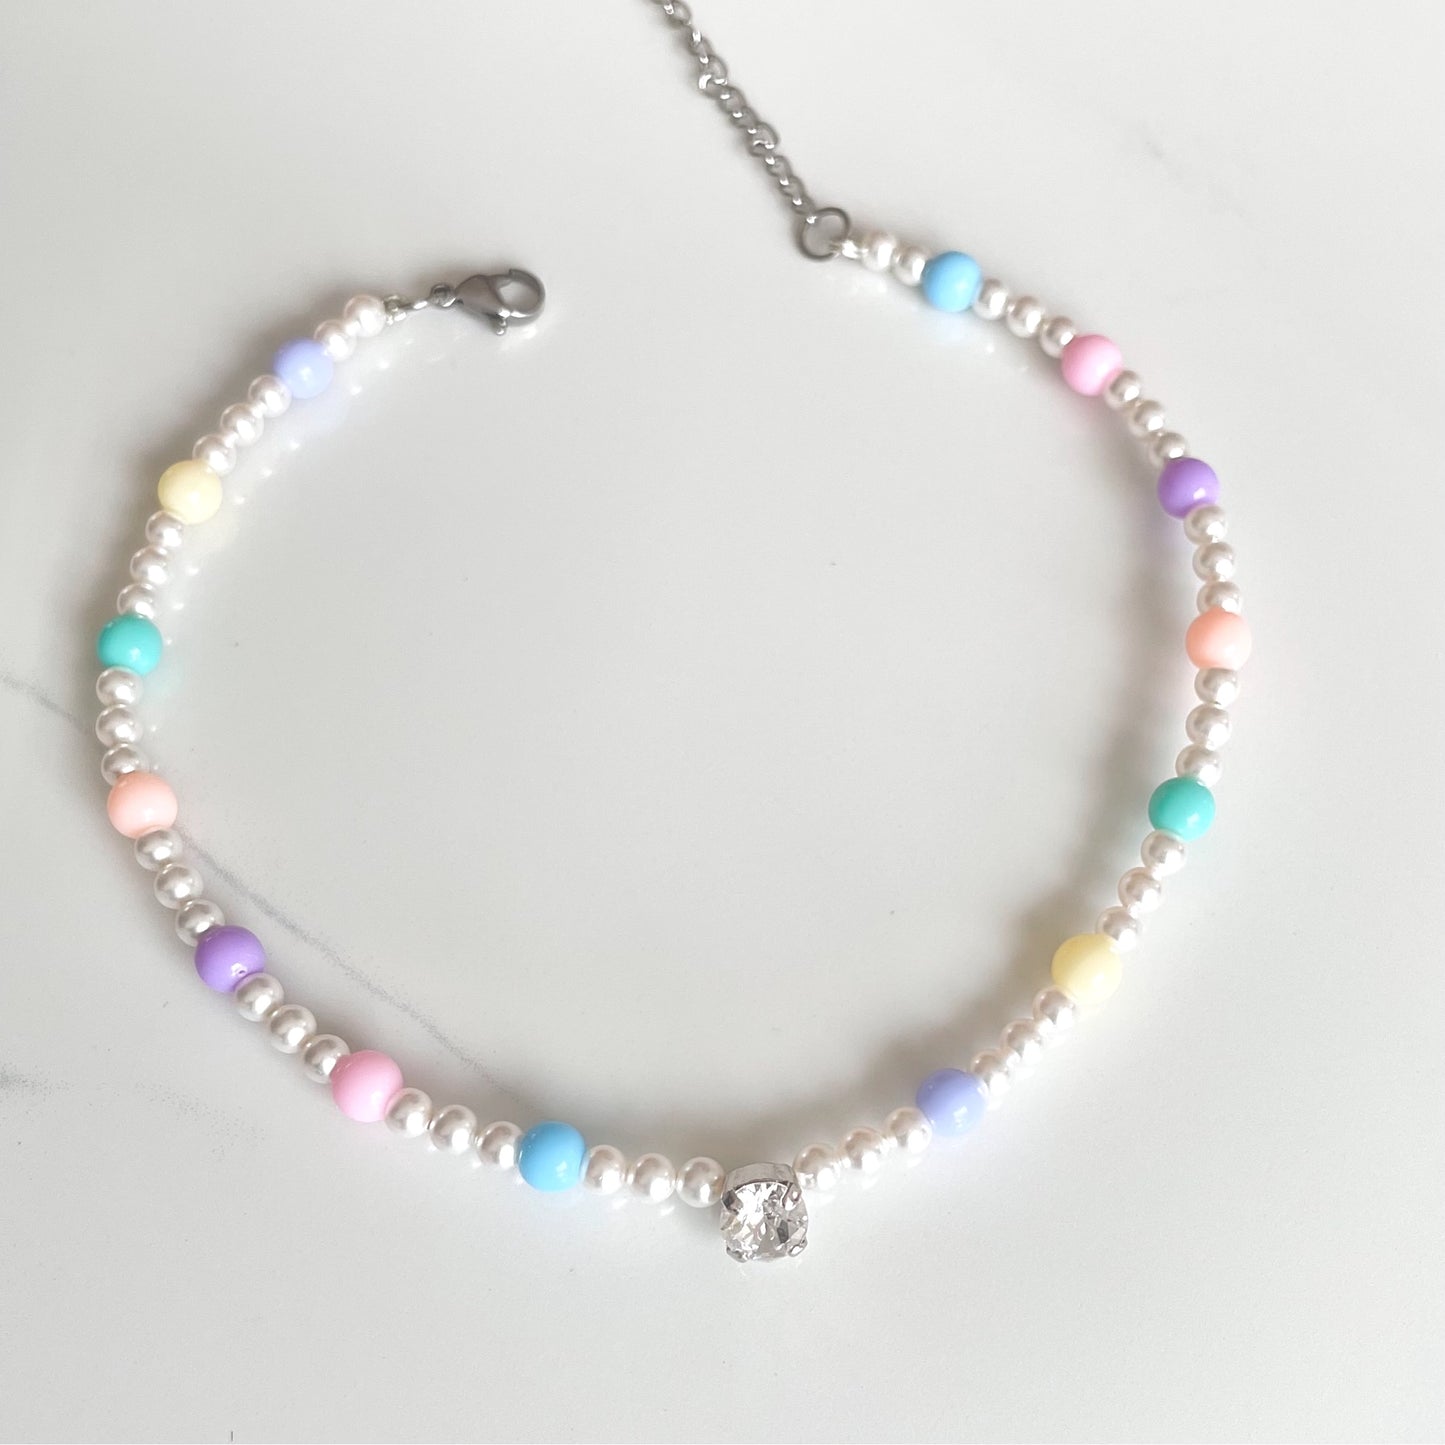 The Ally Crystal Necklace